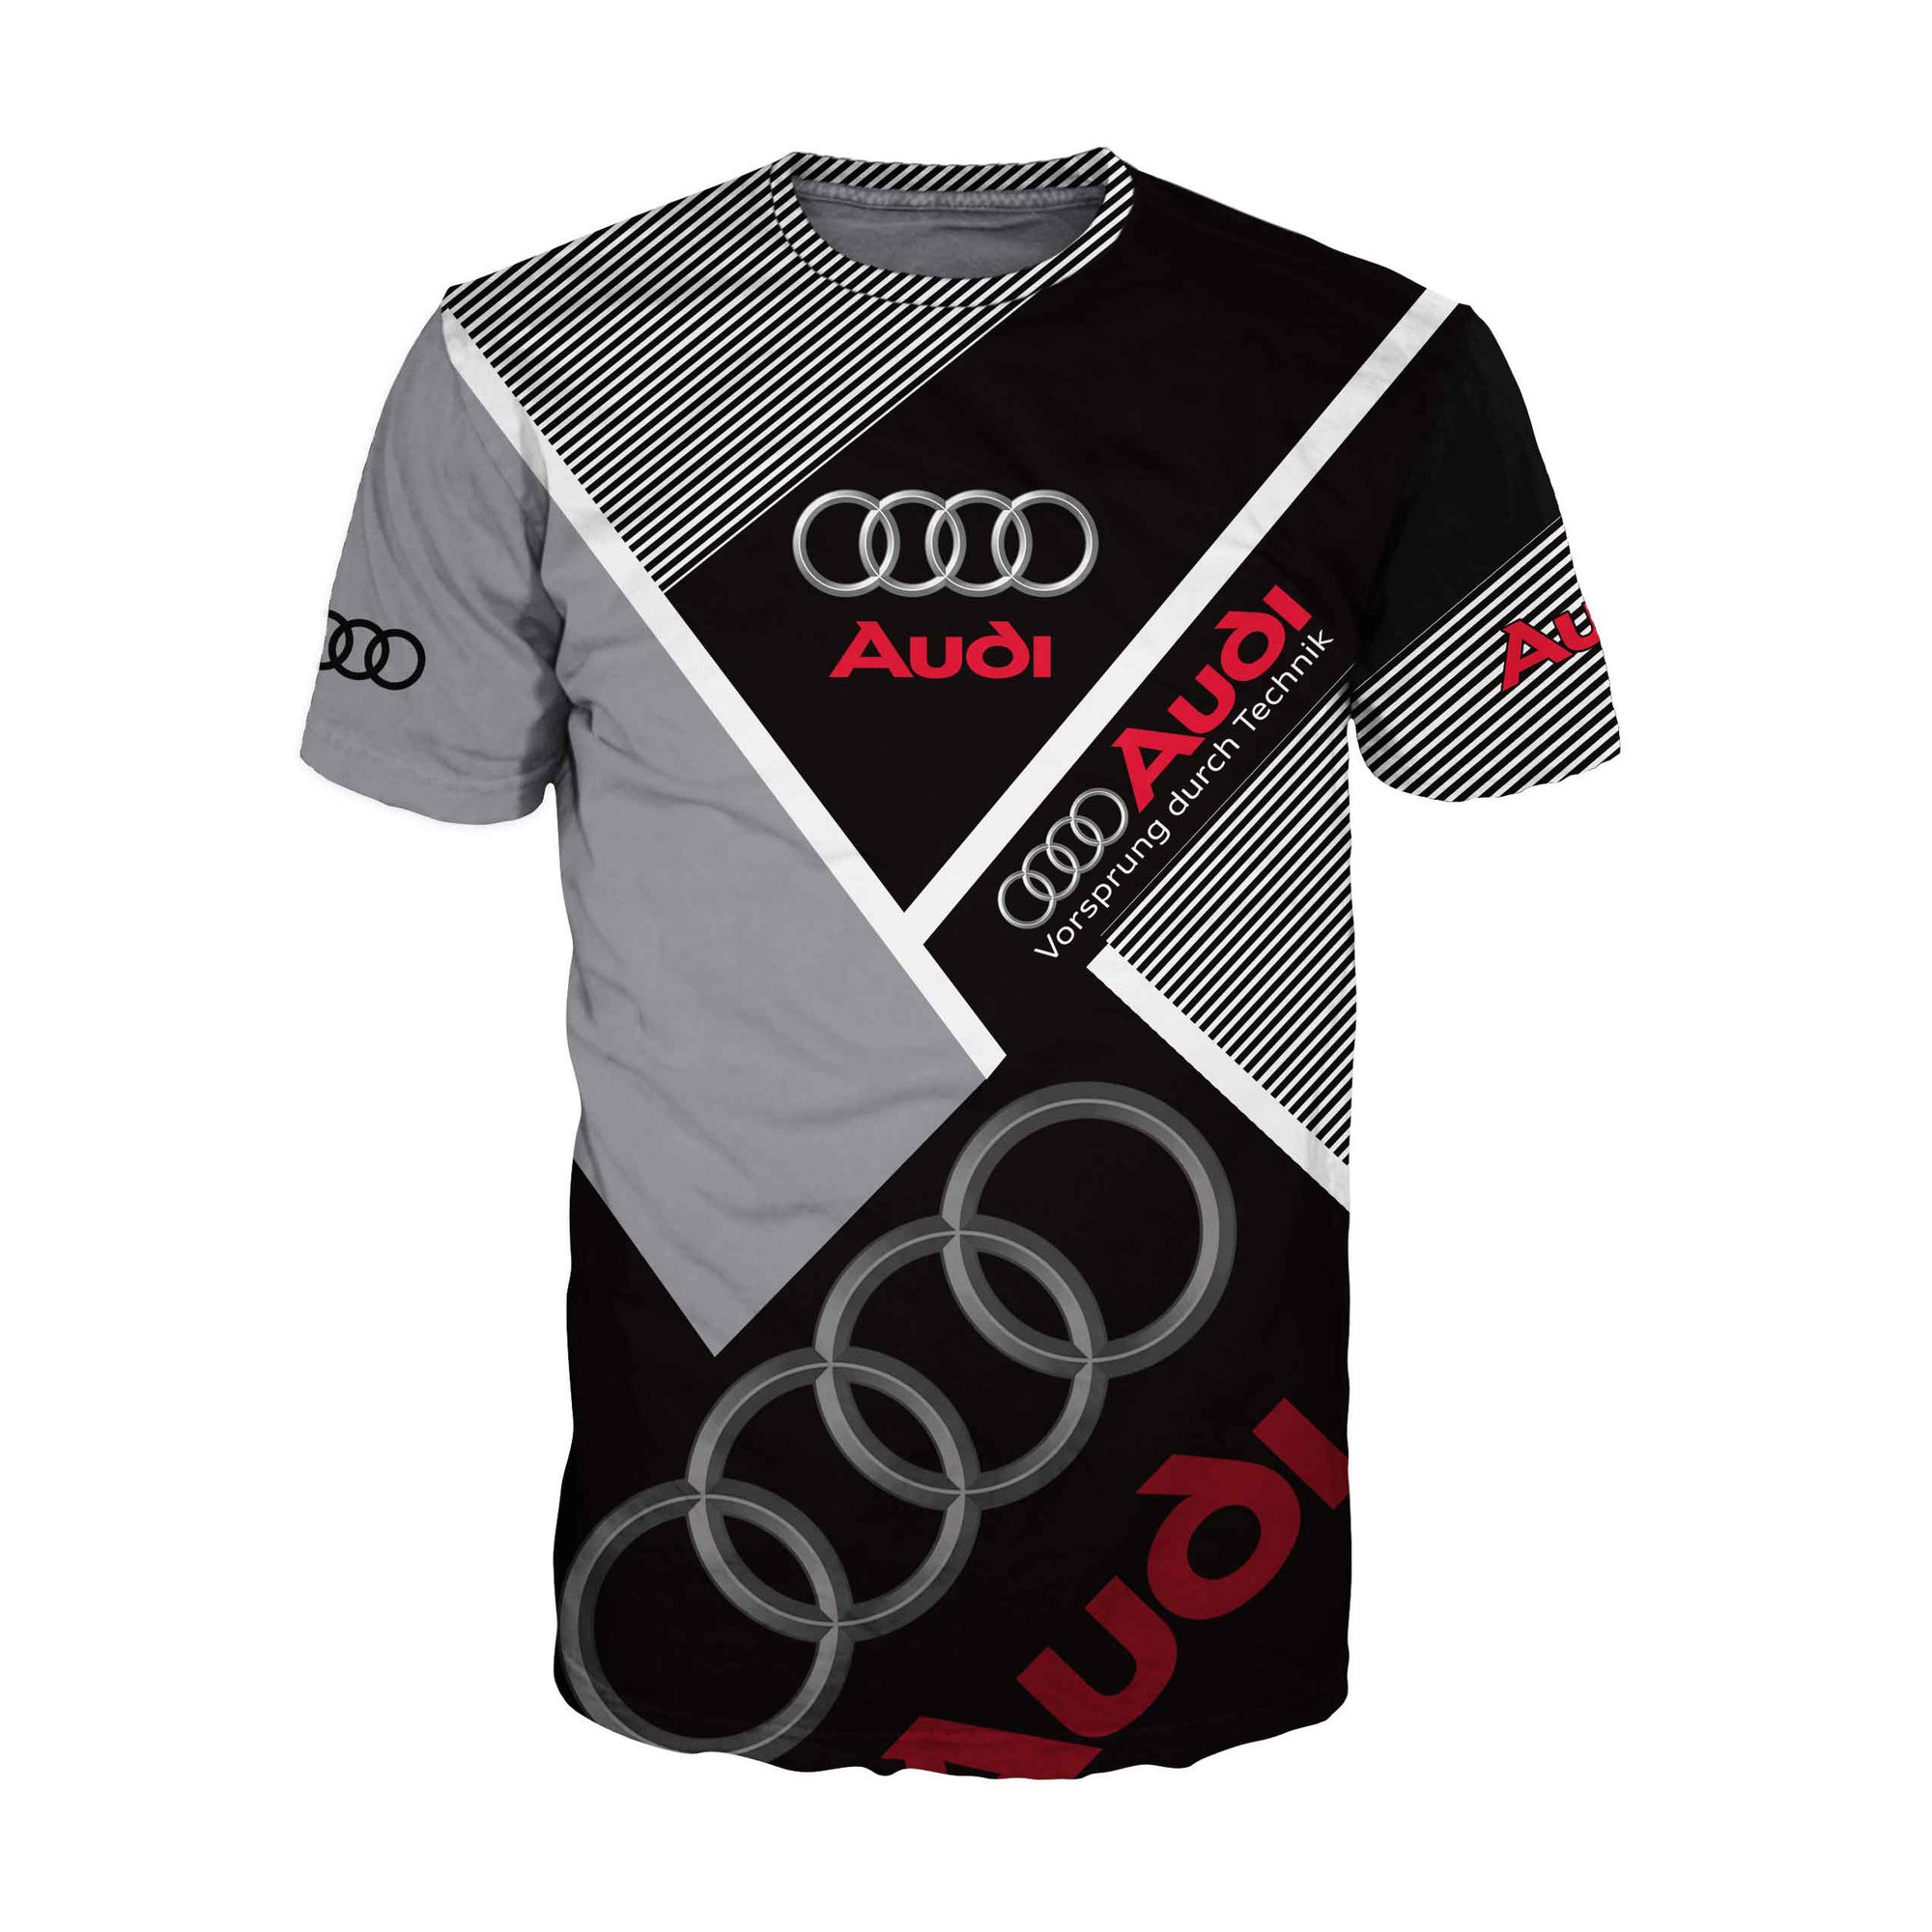 Discover 3D Cool Audi T-shirt Printed